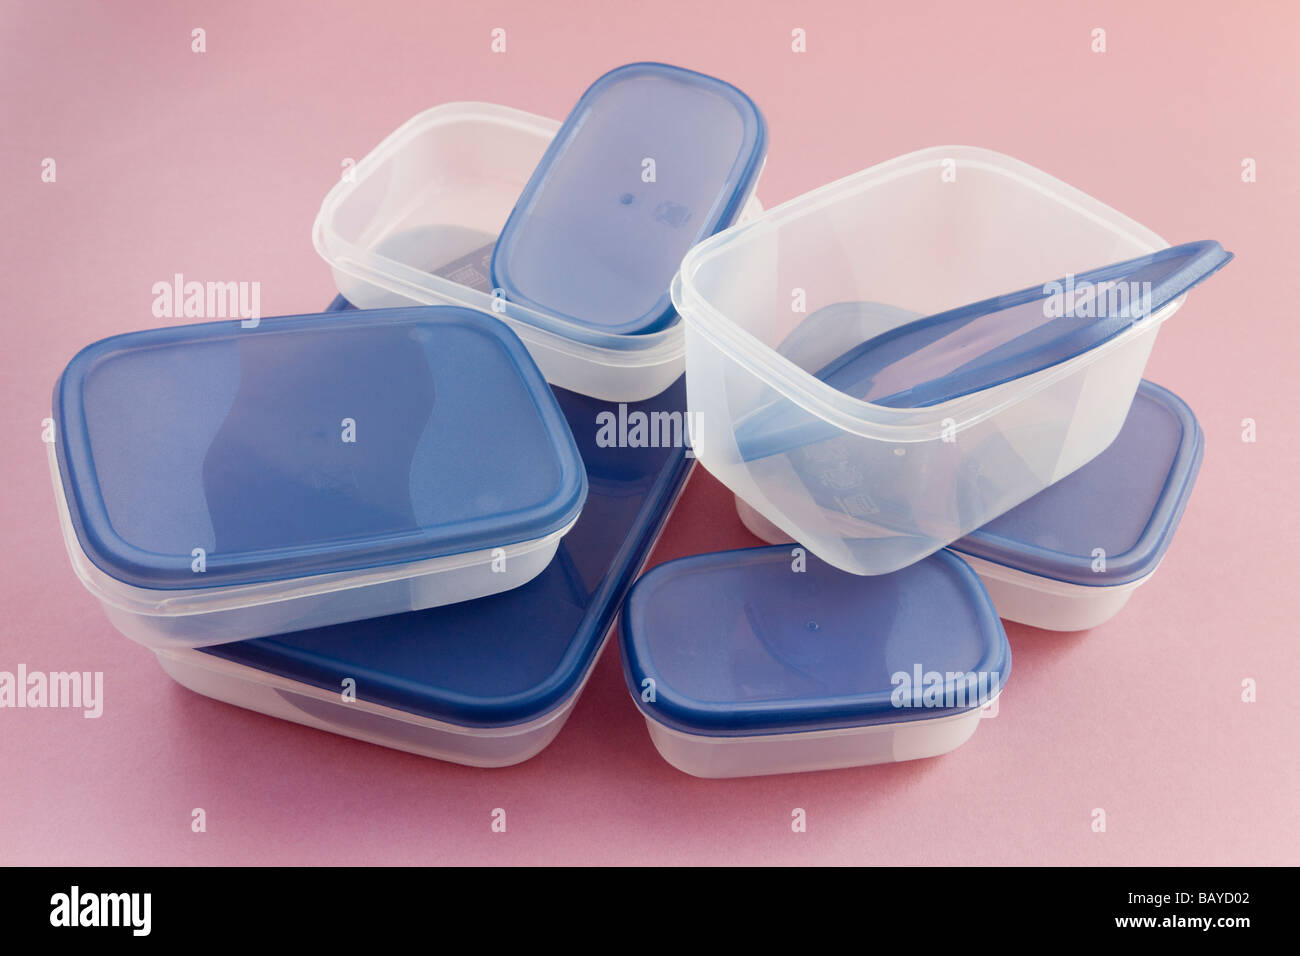 Plastic food containers with lids in various sizes and shapes Stock Photo